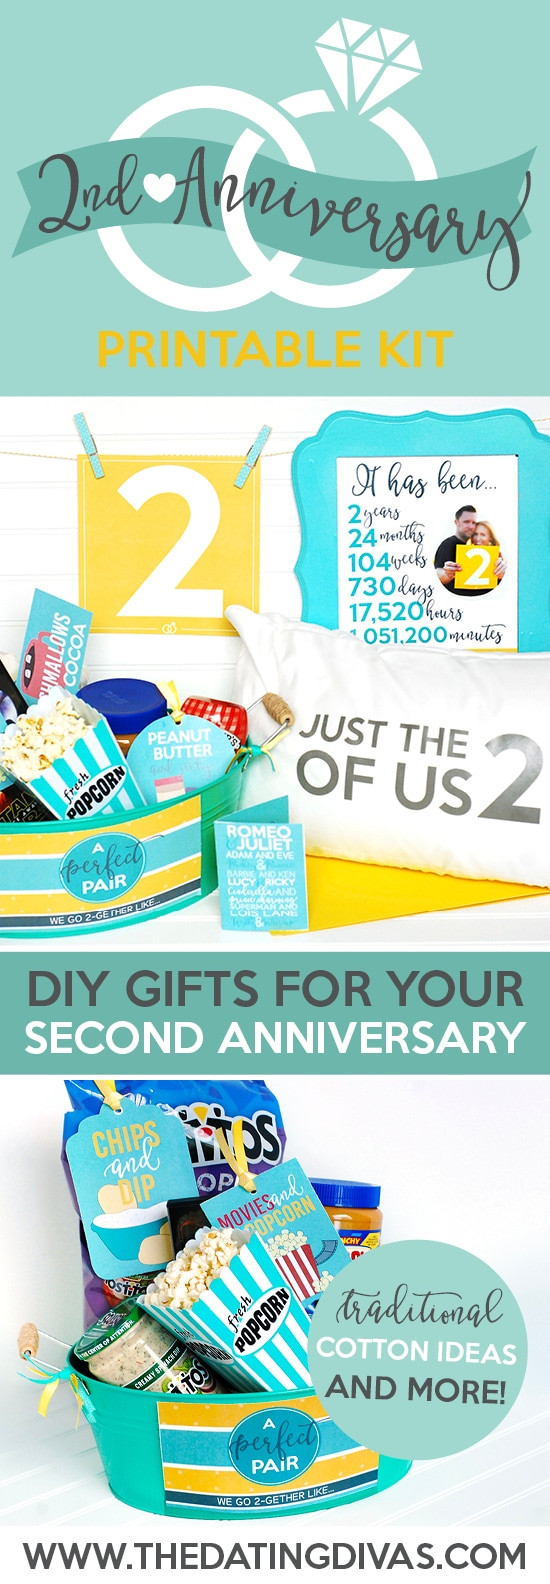 Second Anniversary Gift Ideas
 Second Anniversary Gift Printable Kit The Dating Divas